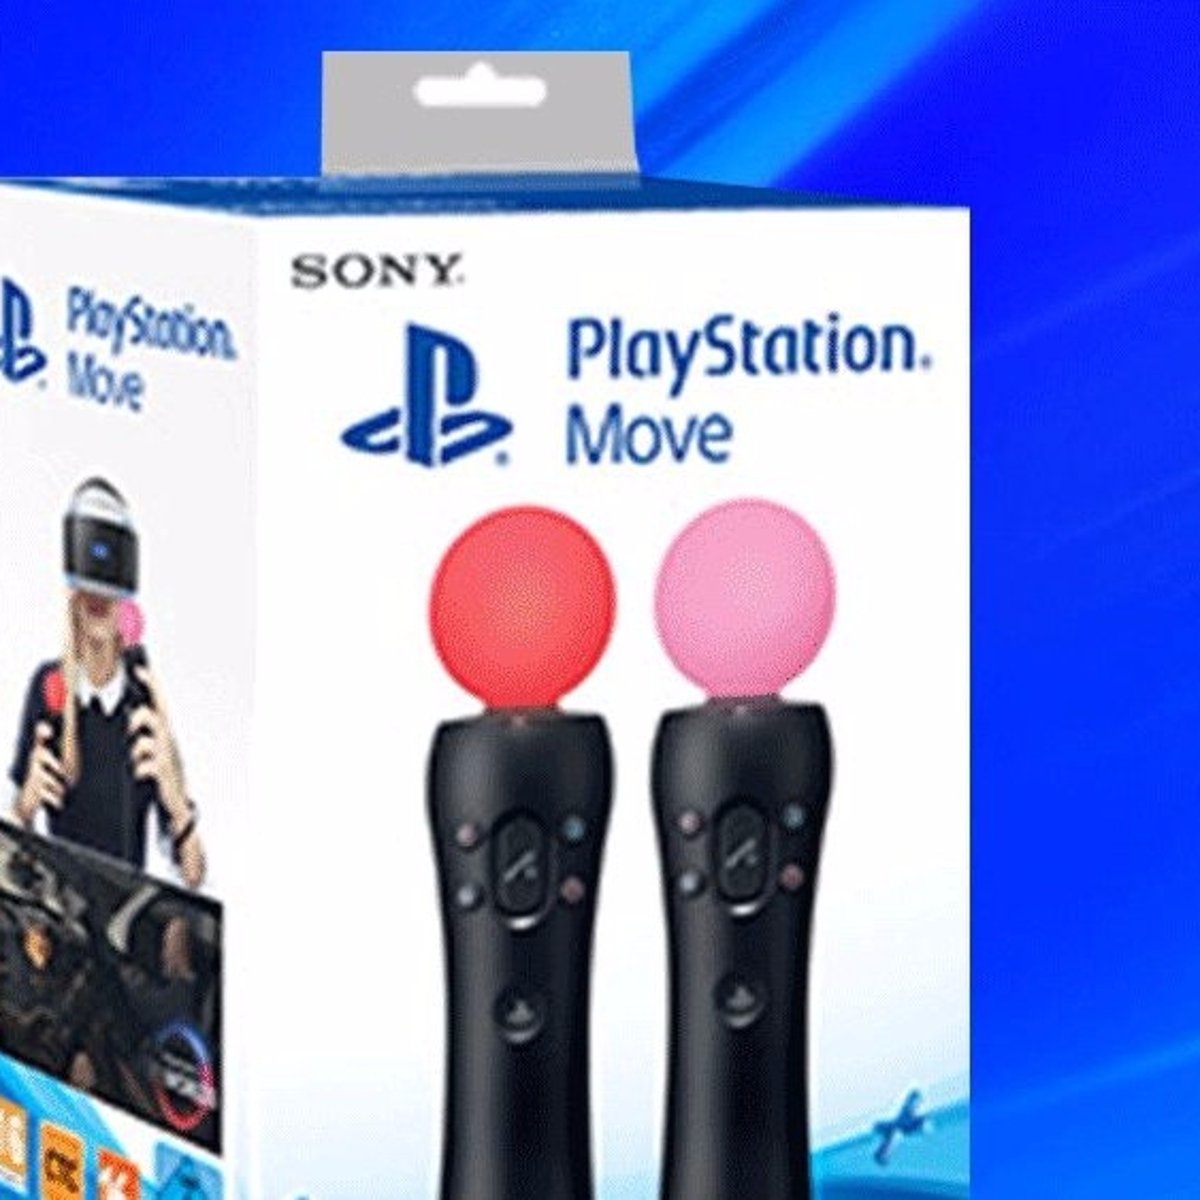 PlayStation Move is back, and now a PSVR double pack | Eurogamer.net